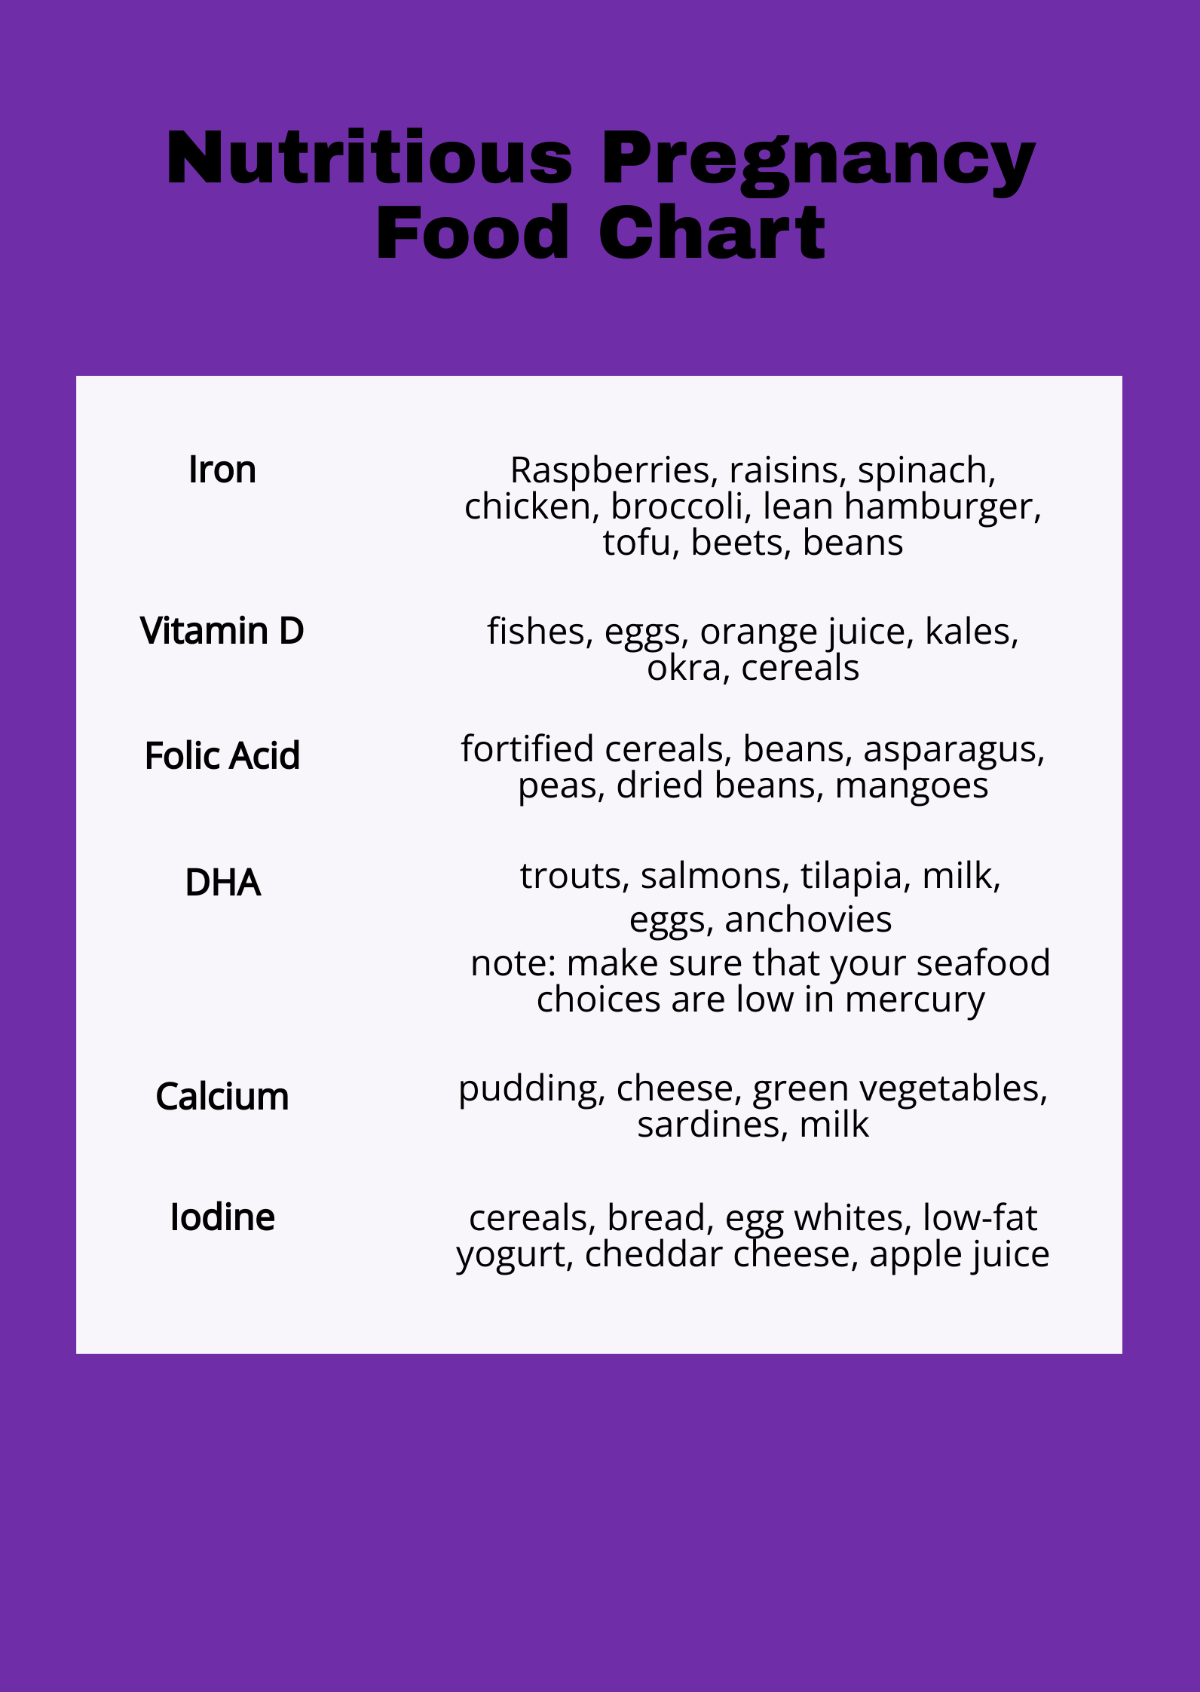 Nutritious Pregnancy Food Chart